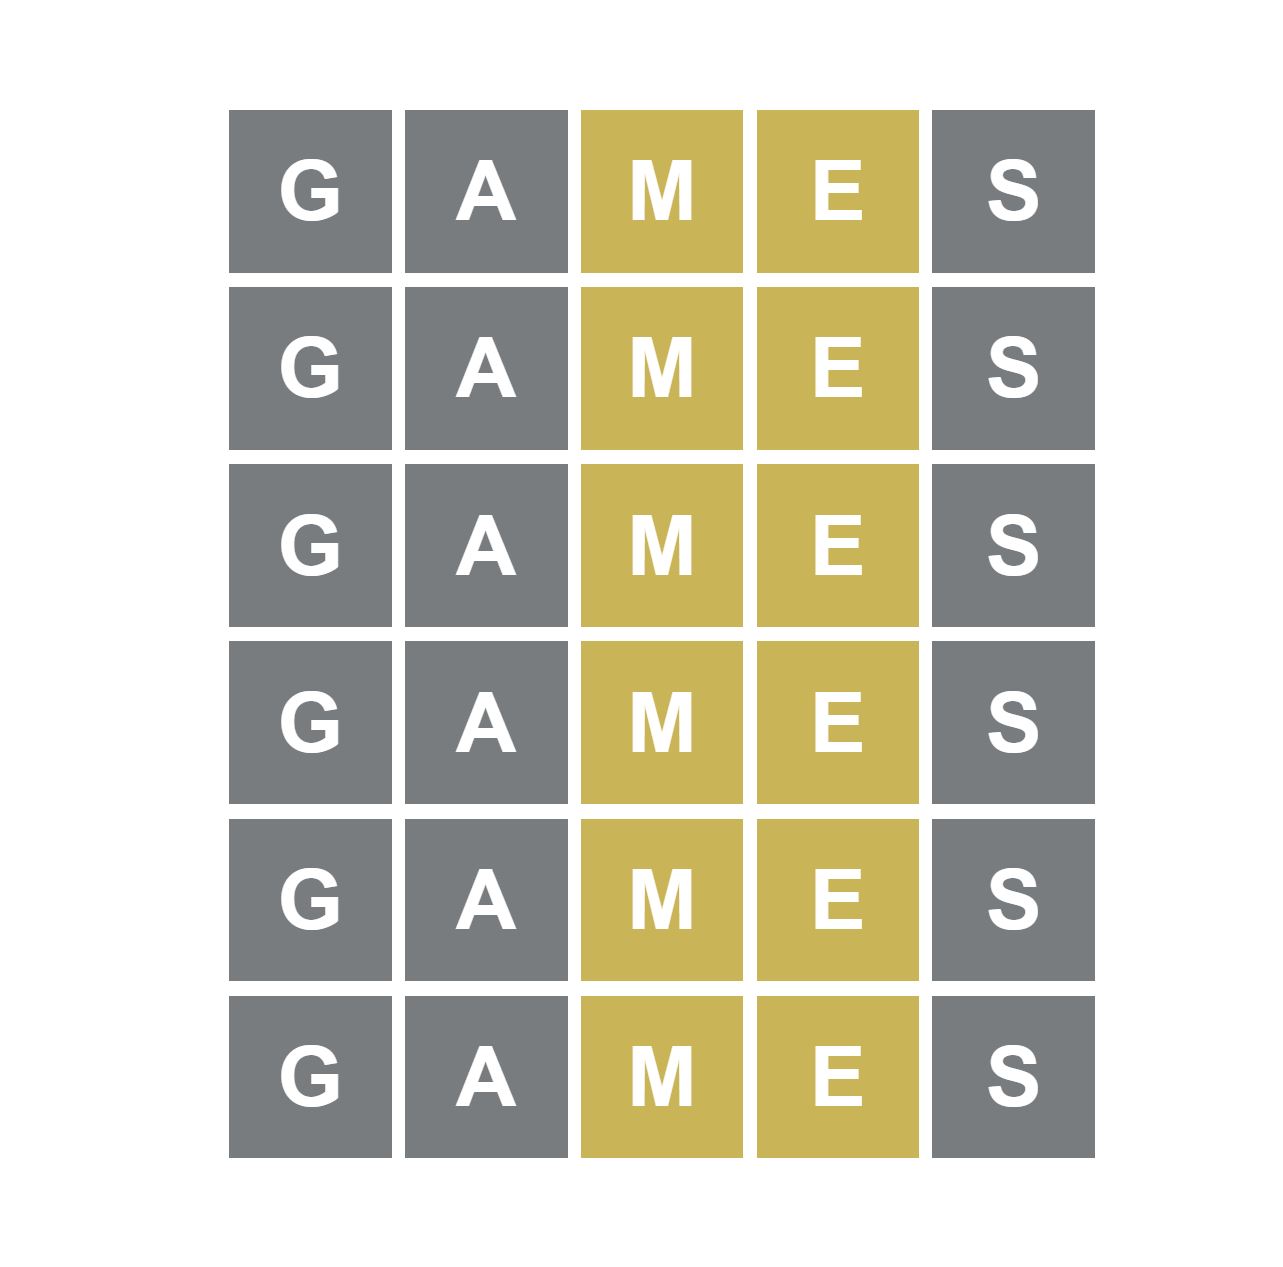 Daily Wordle-like Games Stream 231 